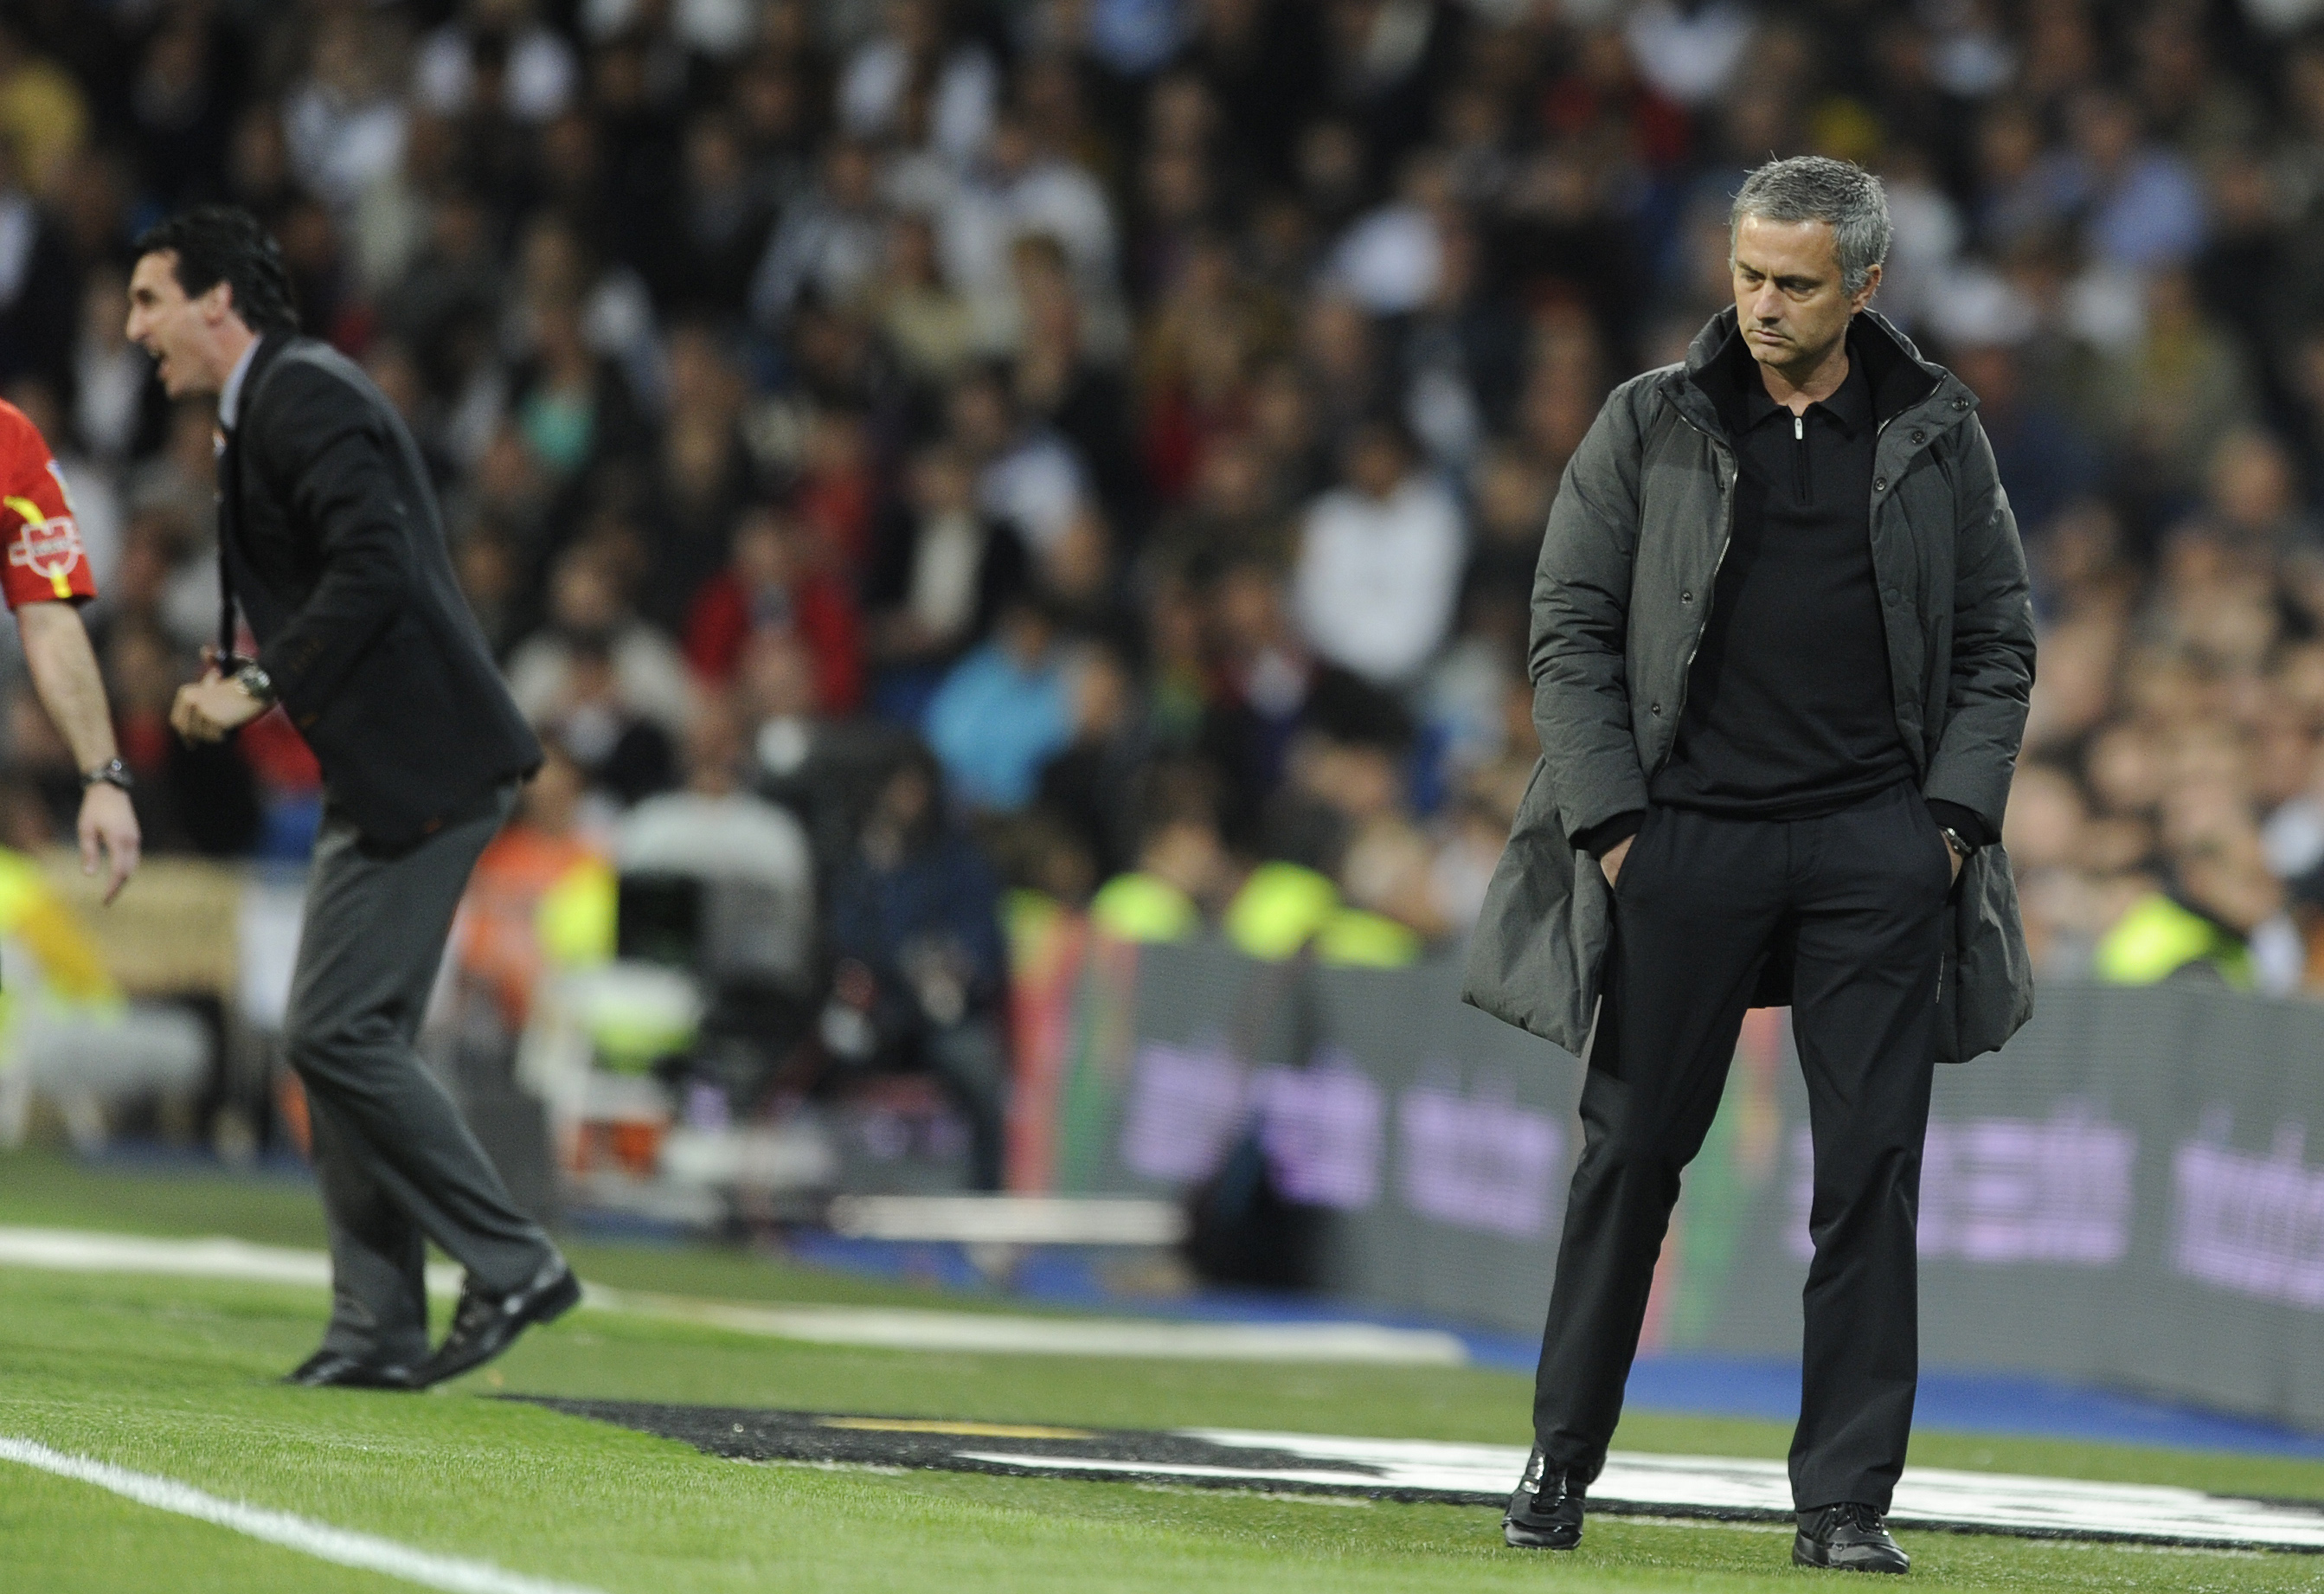 Valencia's coach Unai Emery (L) and Real Madrid's Portuguese coach Jose Mourinho (R) react during the Spanish league football match Real Madrid against Valencia at the Santiago Bernabeu stadium in Madrid, on April 08, 2012.  AFP PHOTO/DOMINIQUE FAGET (Photo credit should read DOMINIQUE FAGET/AFP/Getty Images)